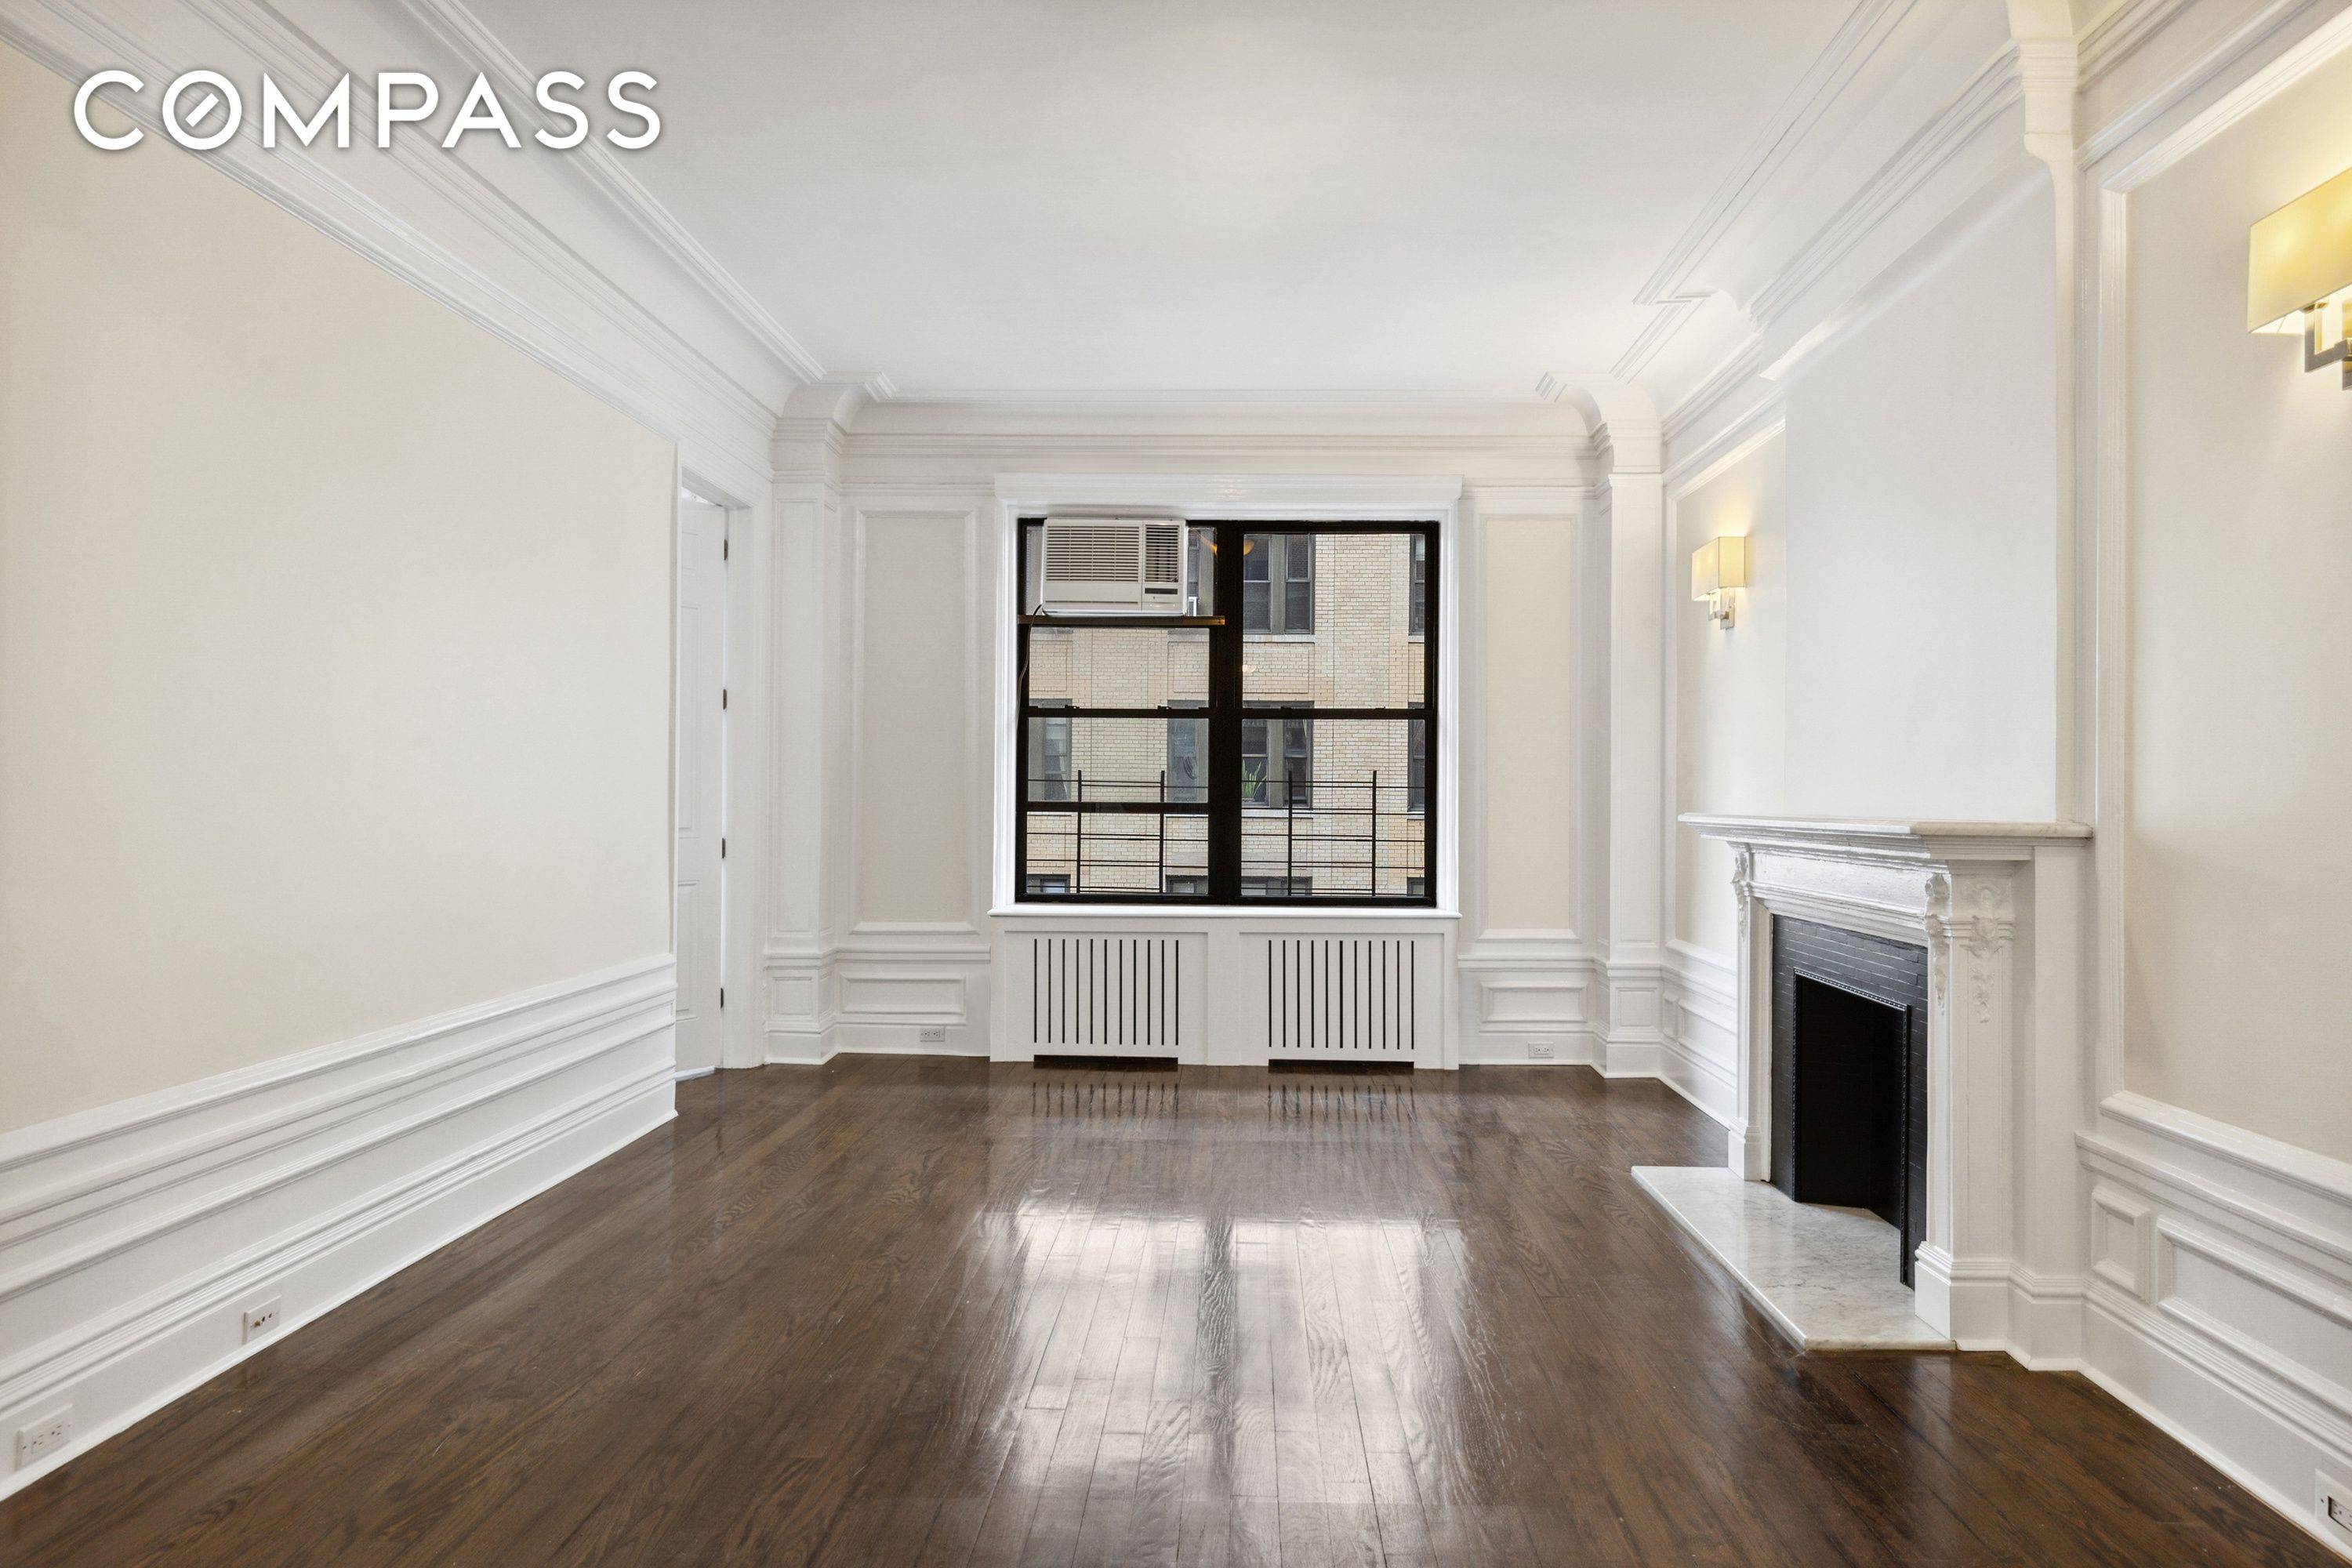 BEST IN CLASS Classic prewar beauty and scale harmoniously fuse with a modern open aesthetic here on West End Avenue.